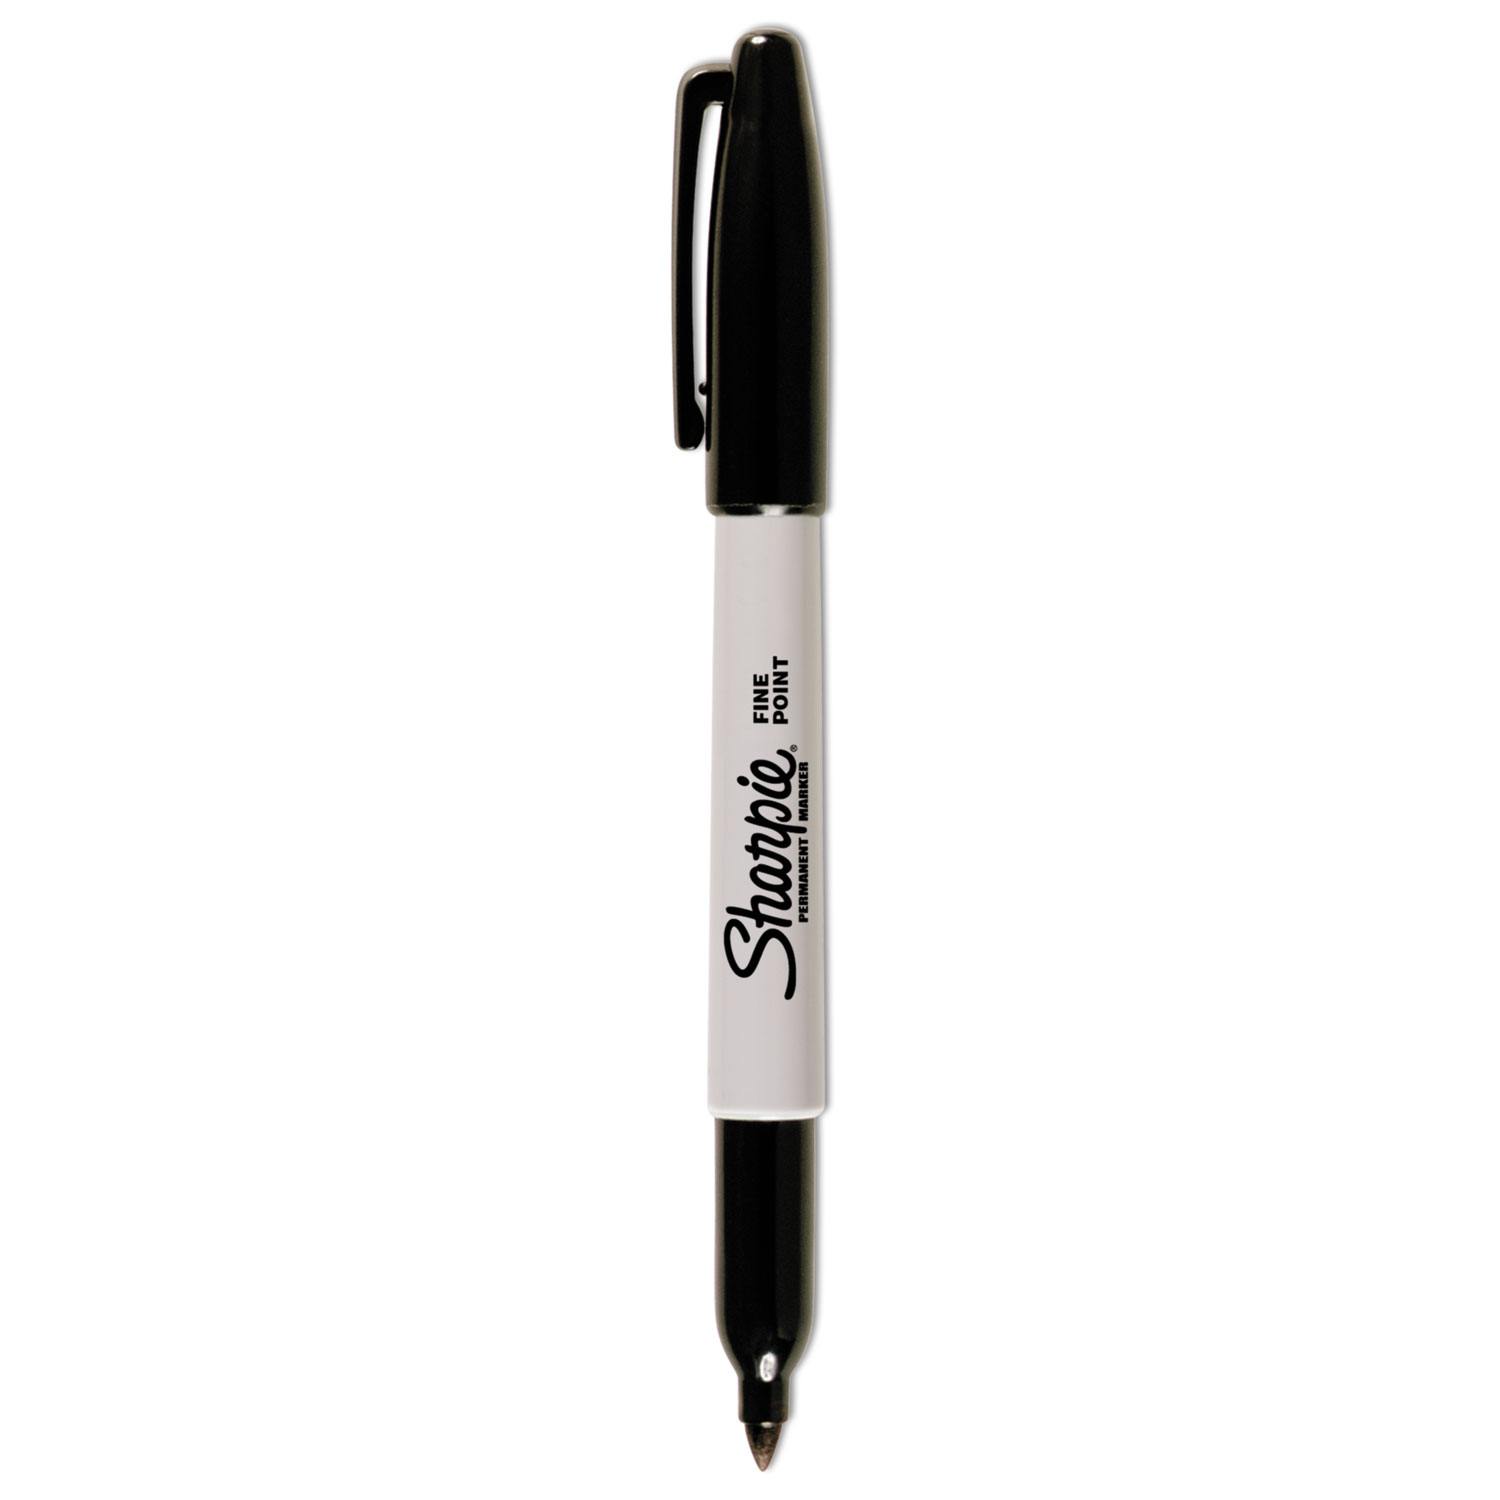 Sharpie 32701 Retractable Fine Tip Marker Set, Black, Permanent Ink,  Intensely Brilliant Color, Resilient Ink Resists Both Fading and Water, 12